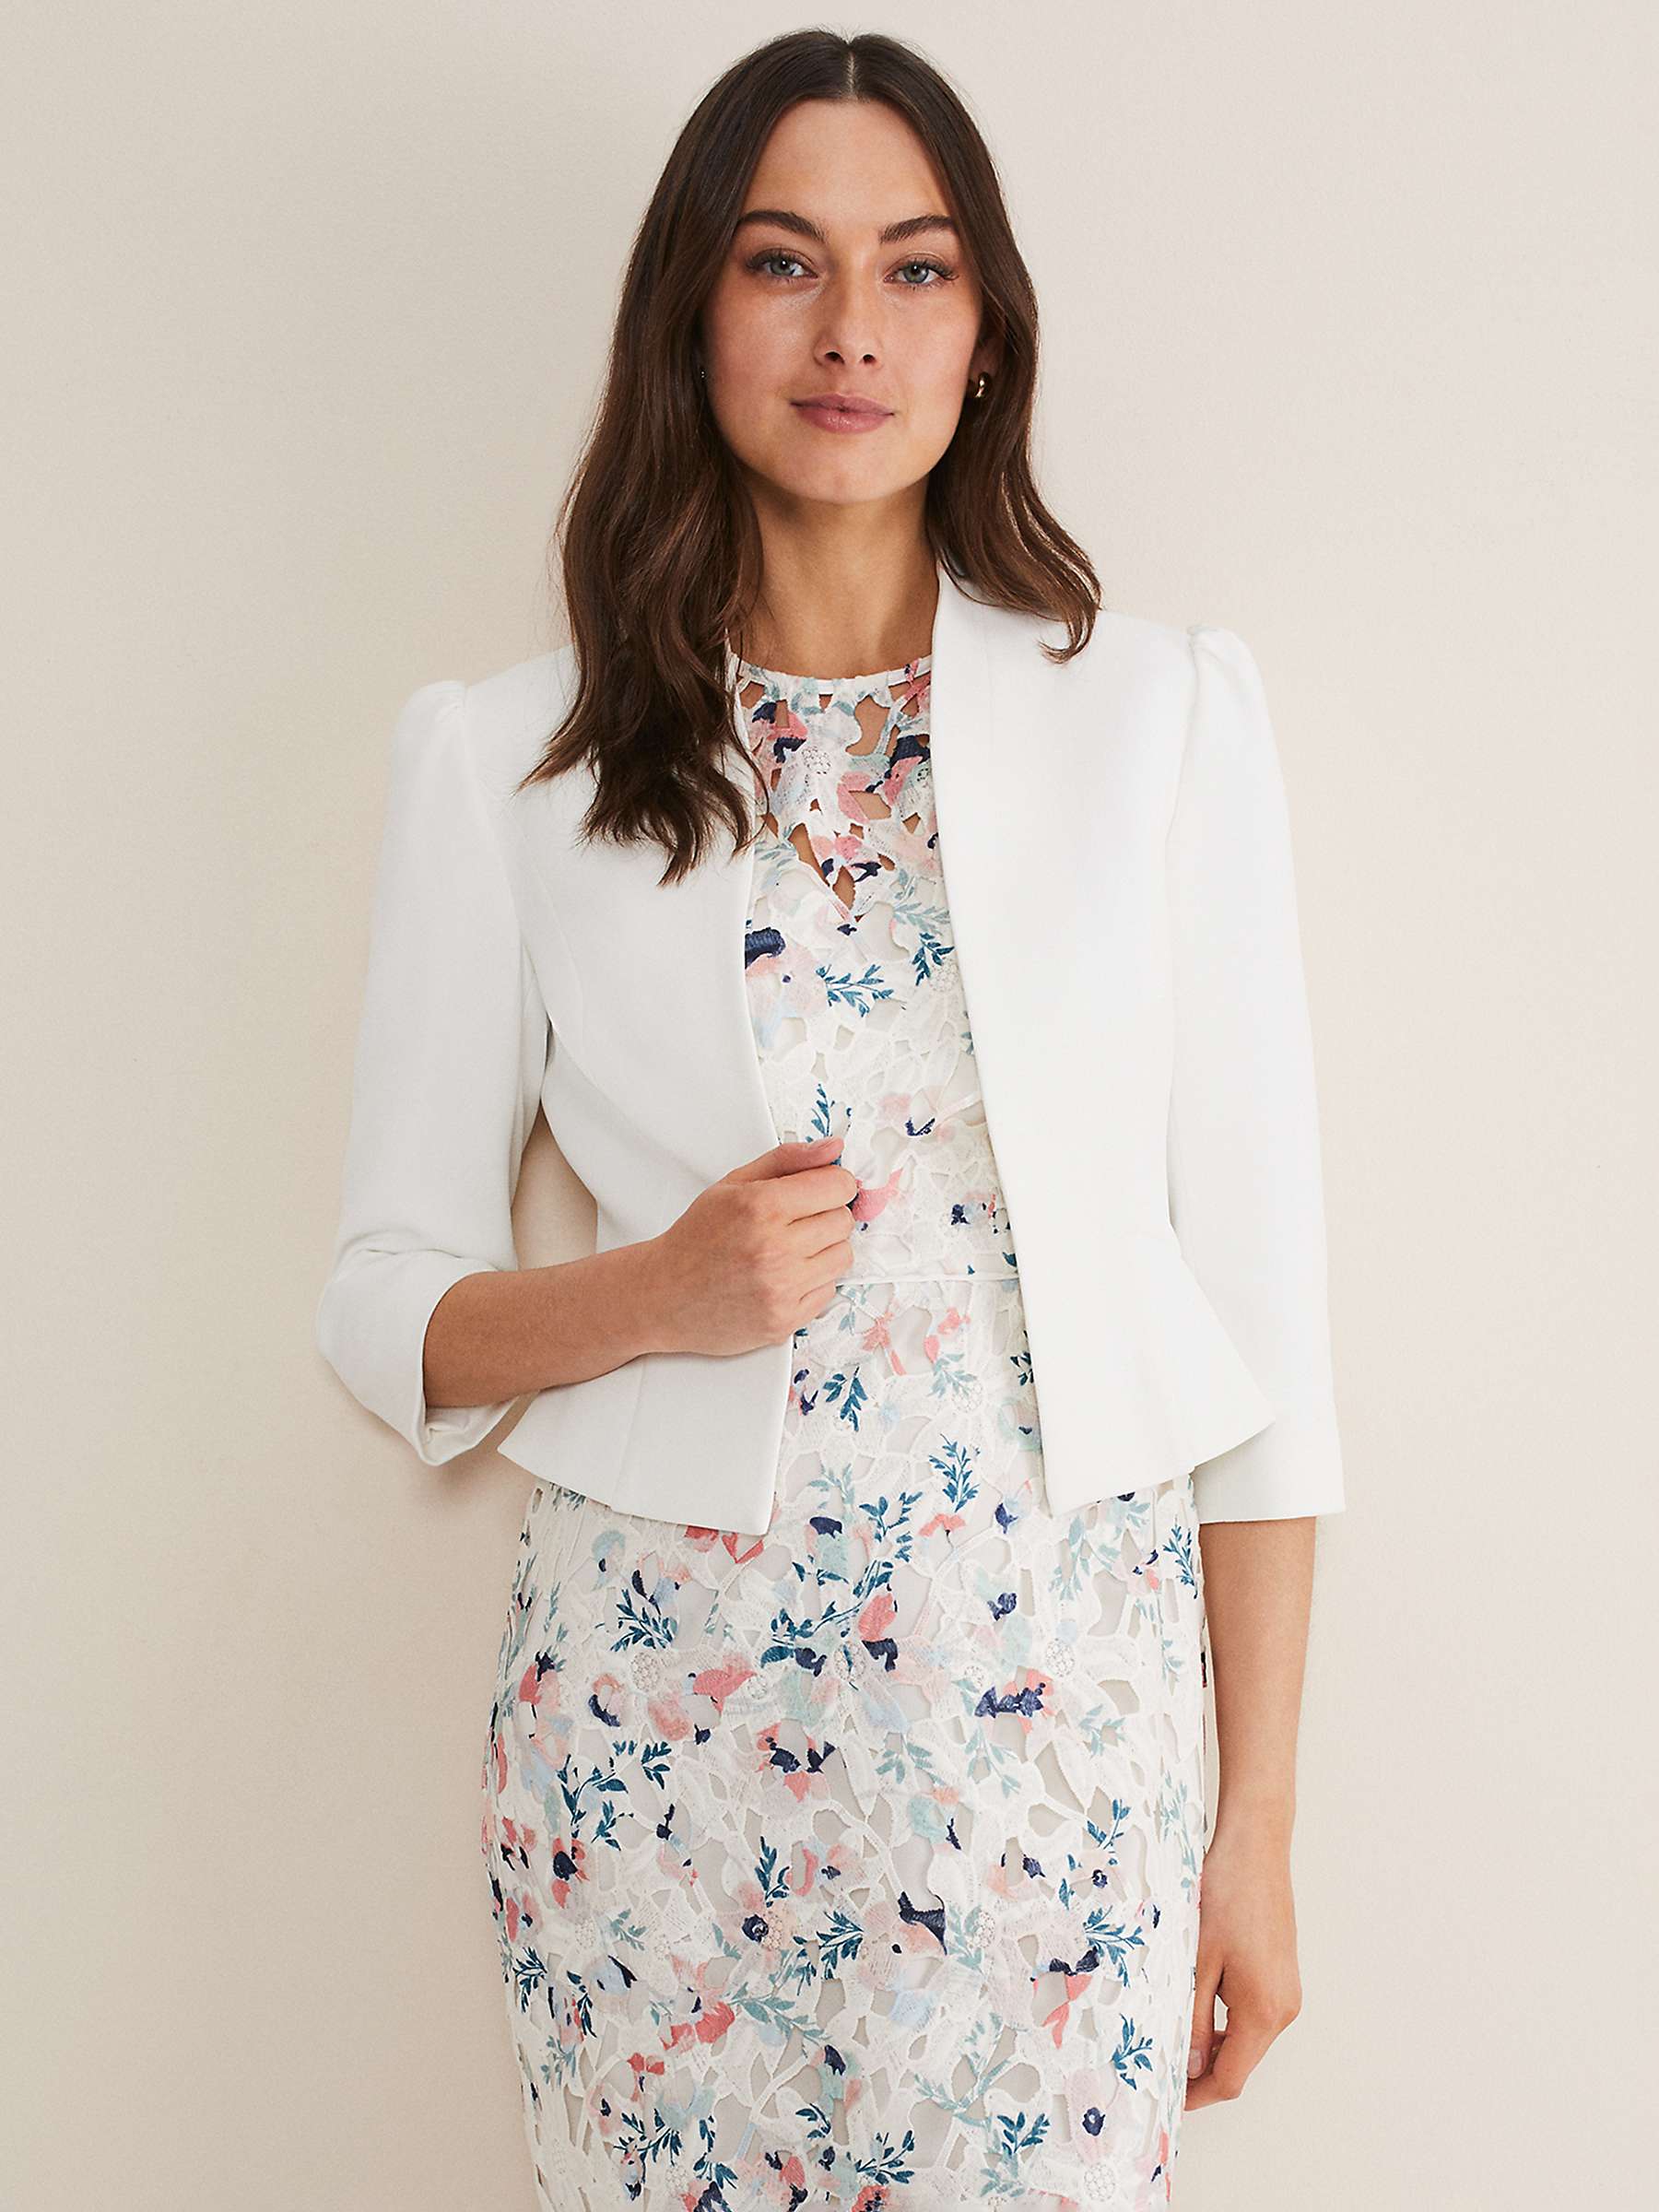 Buy Phase Eight Isabella Bow Detail Jacket Online at johnlewis.com